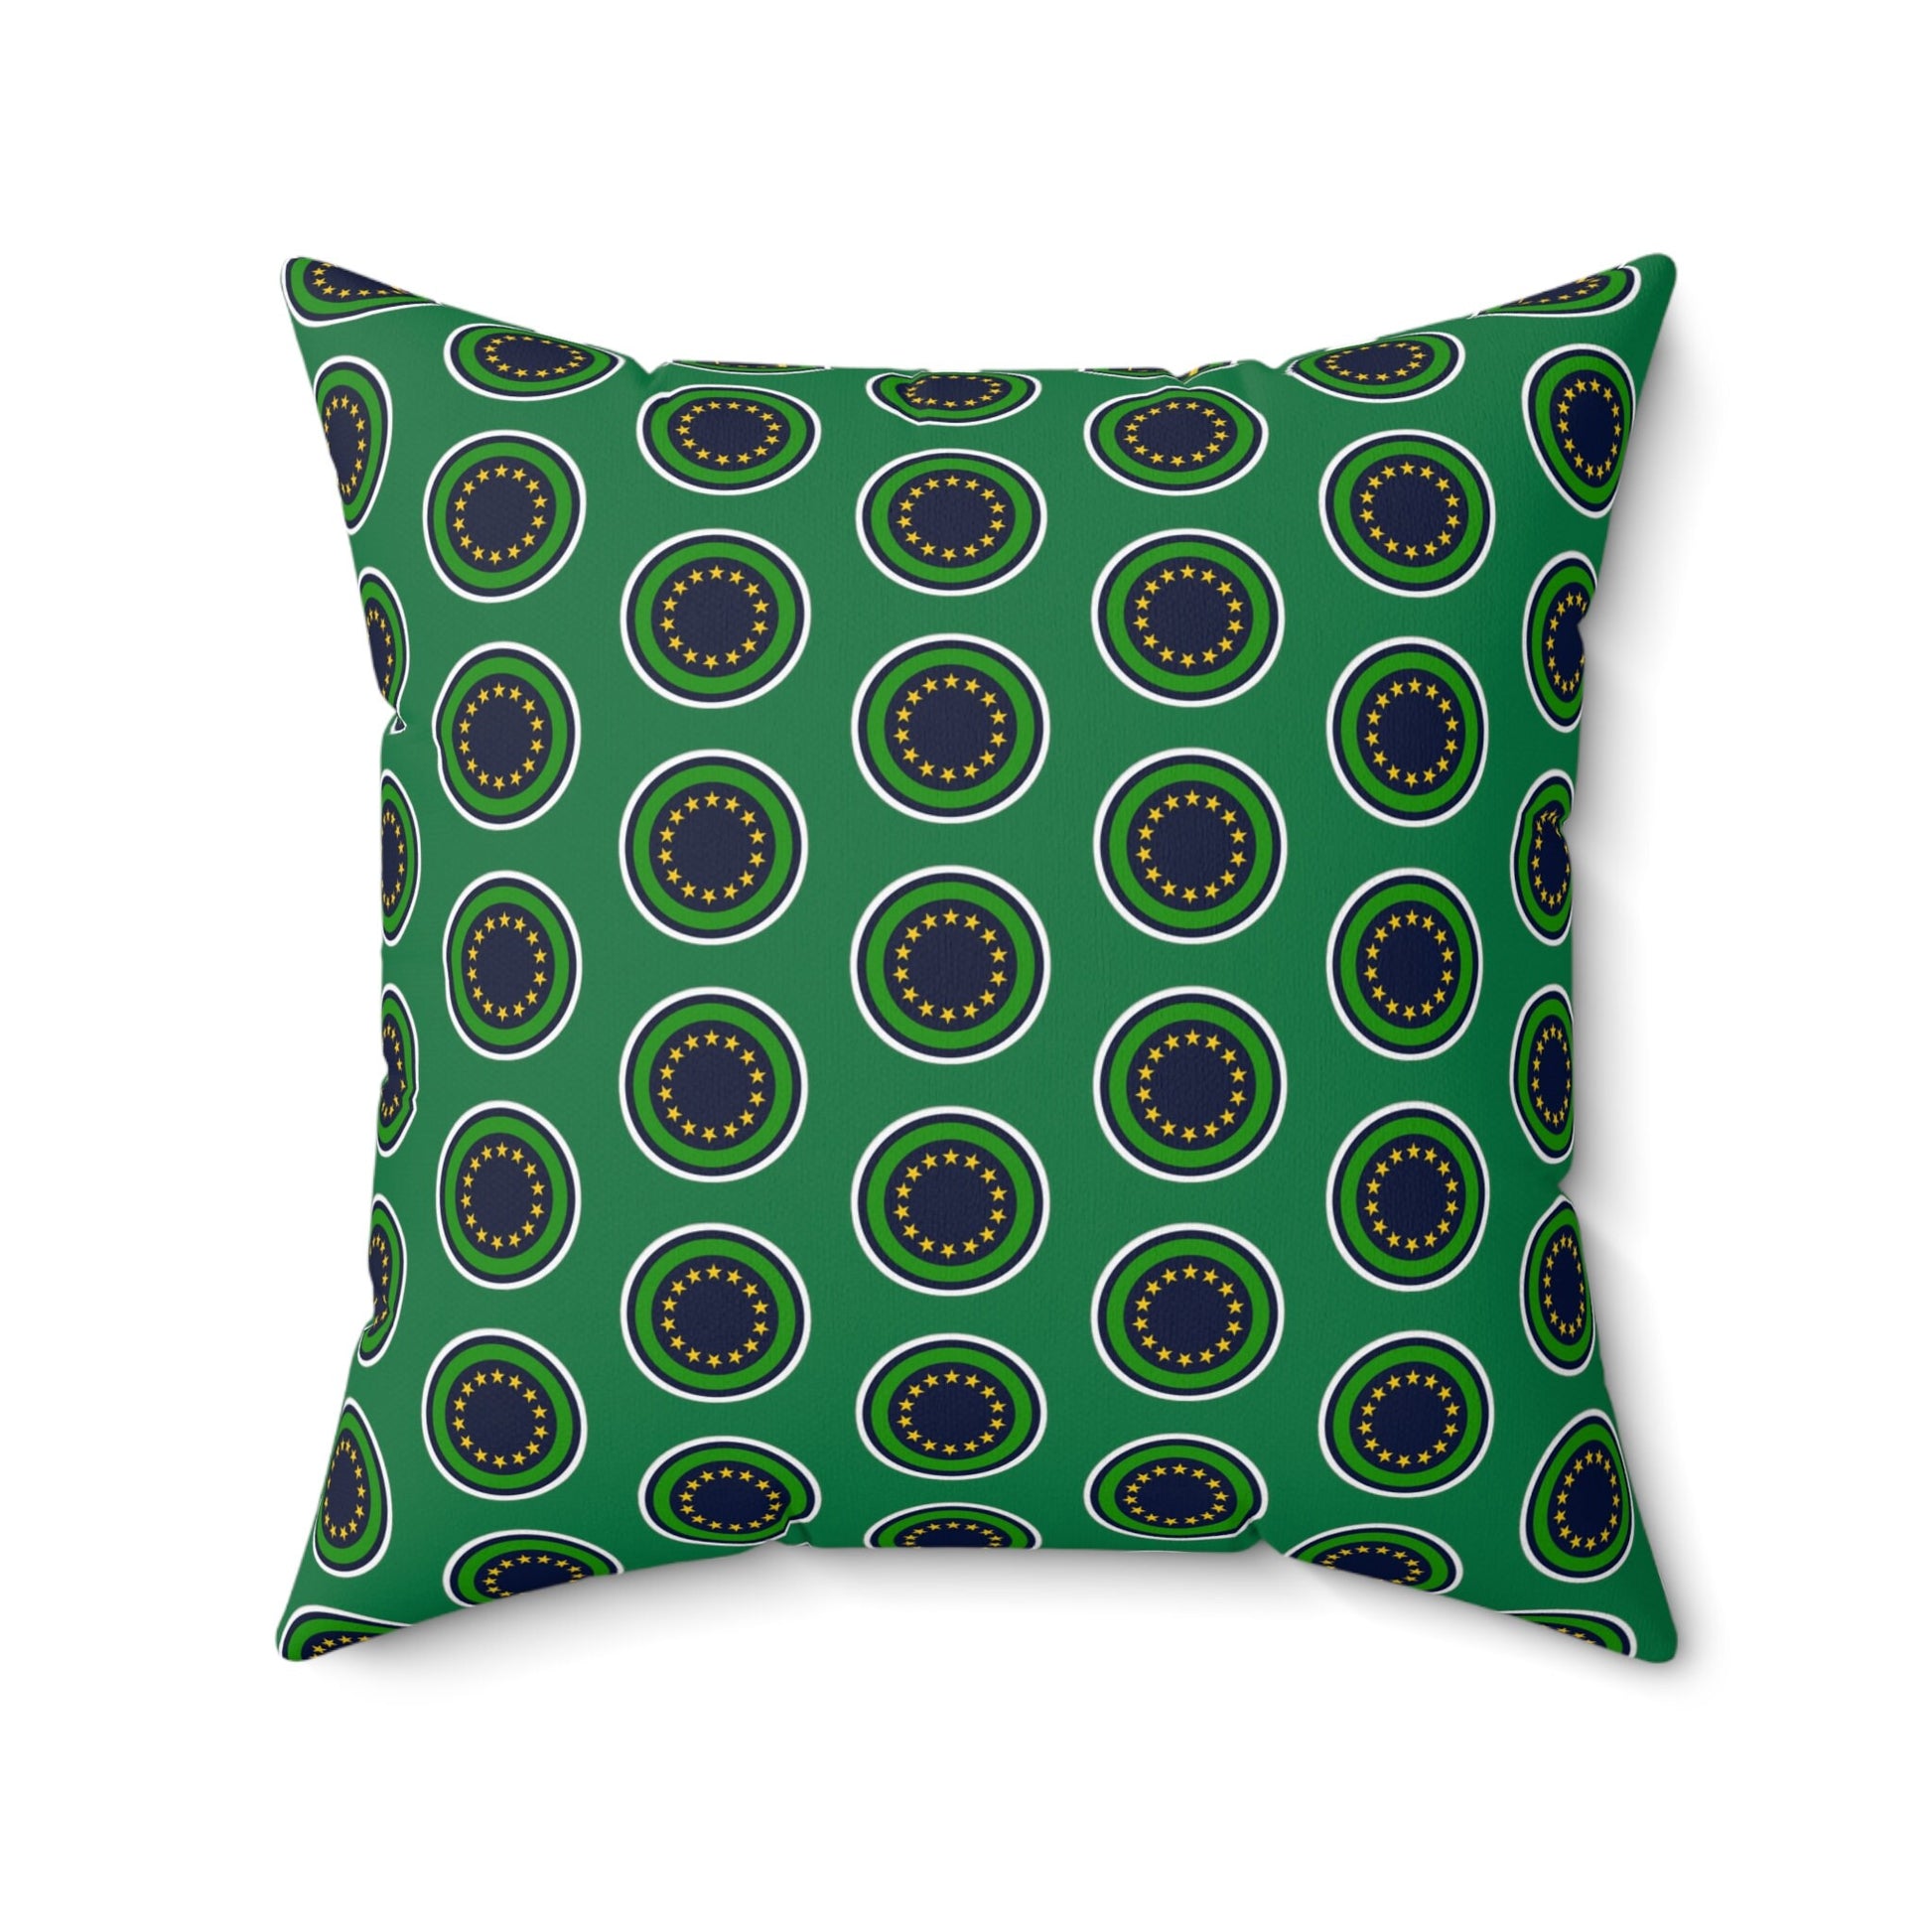 Montpelier Vermont Spun Polyester Square Pillow, Great city pride Housewarming gift, new home decor, house gift